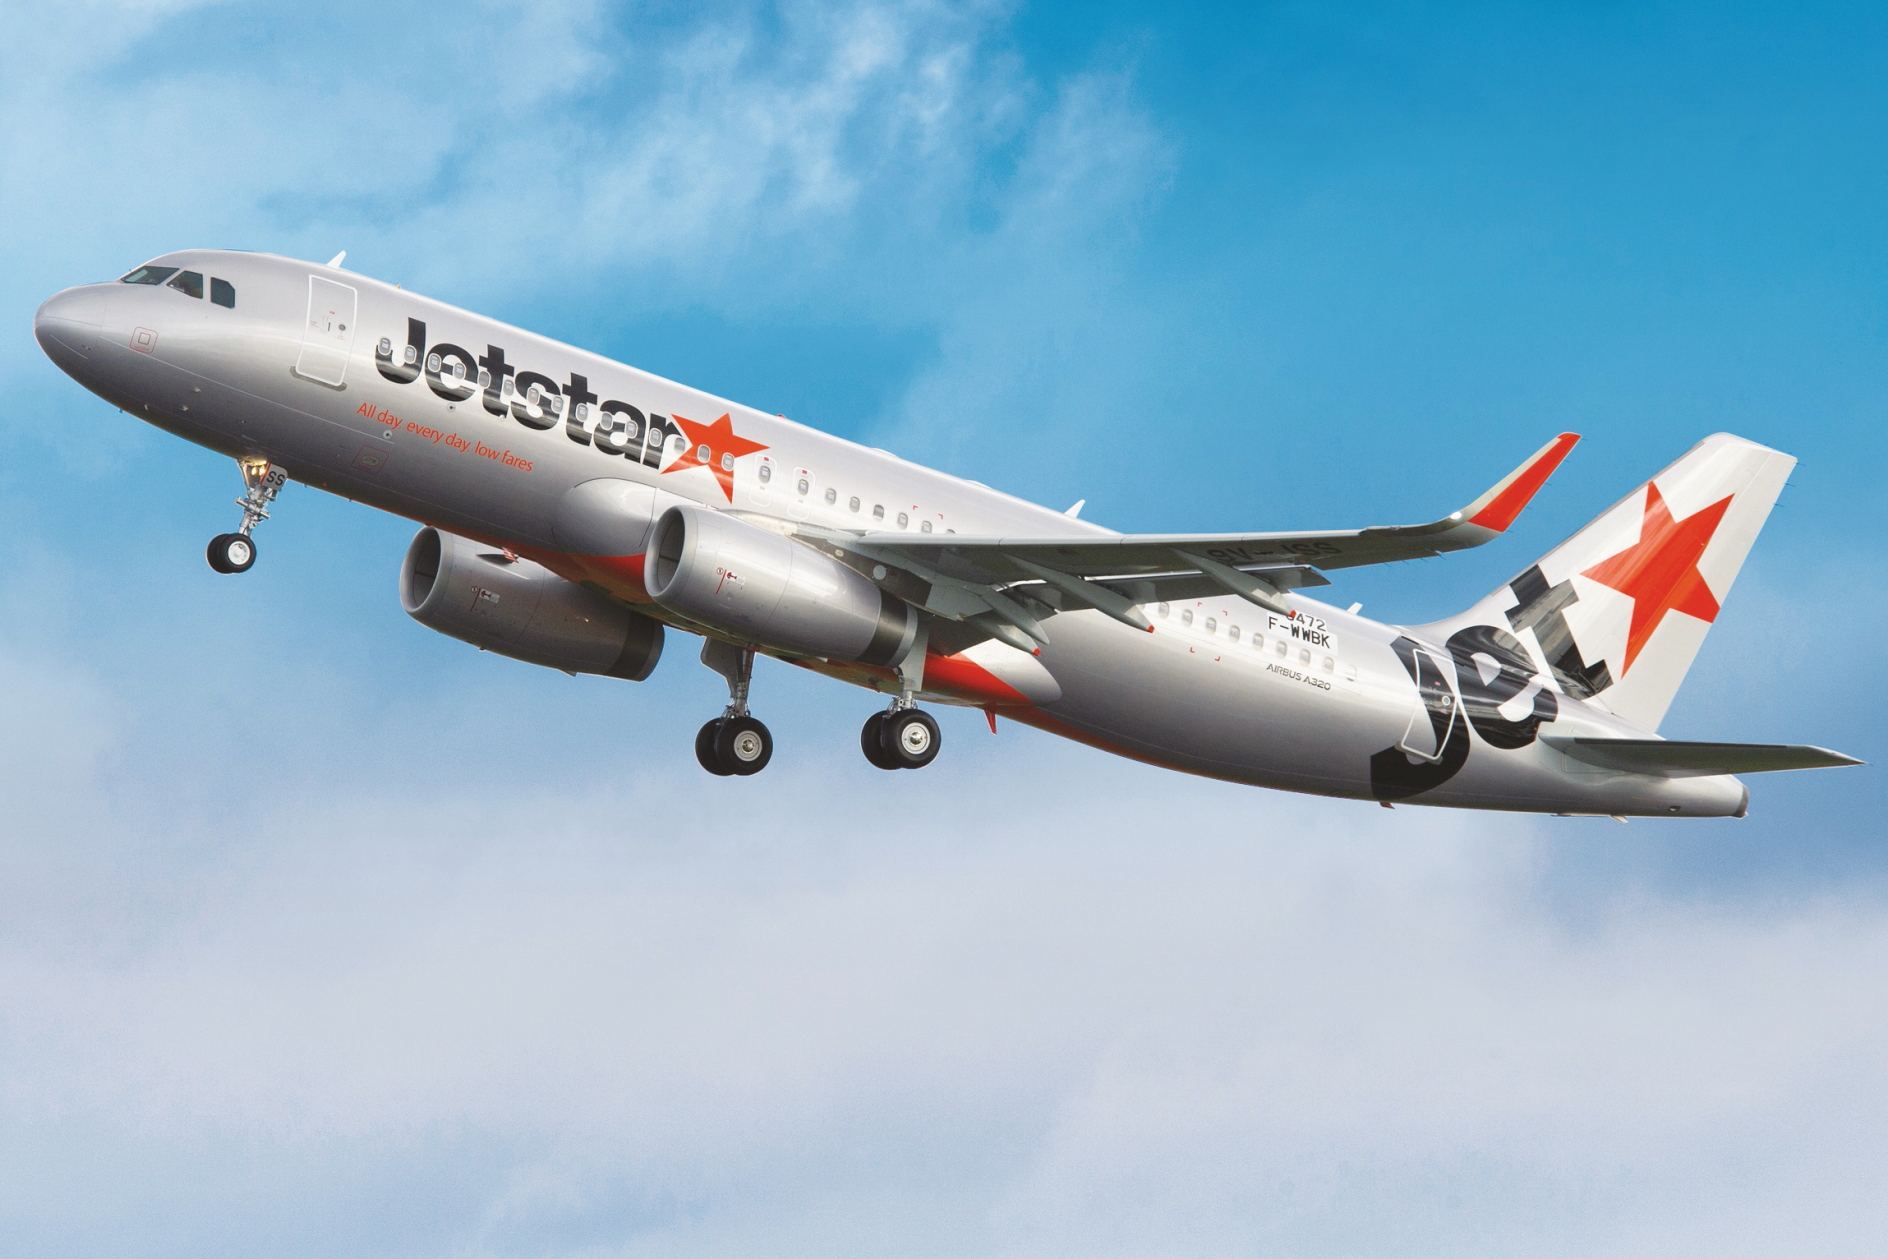 Jetstar Airbus A320. Click to enlarge.